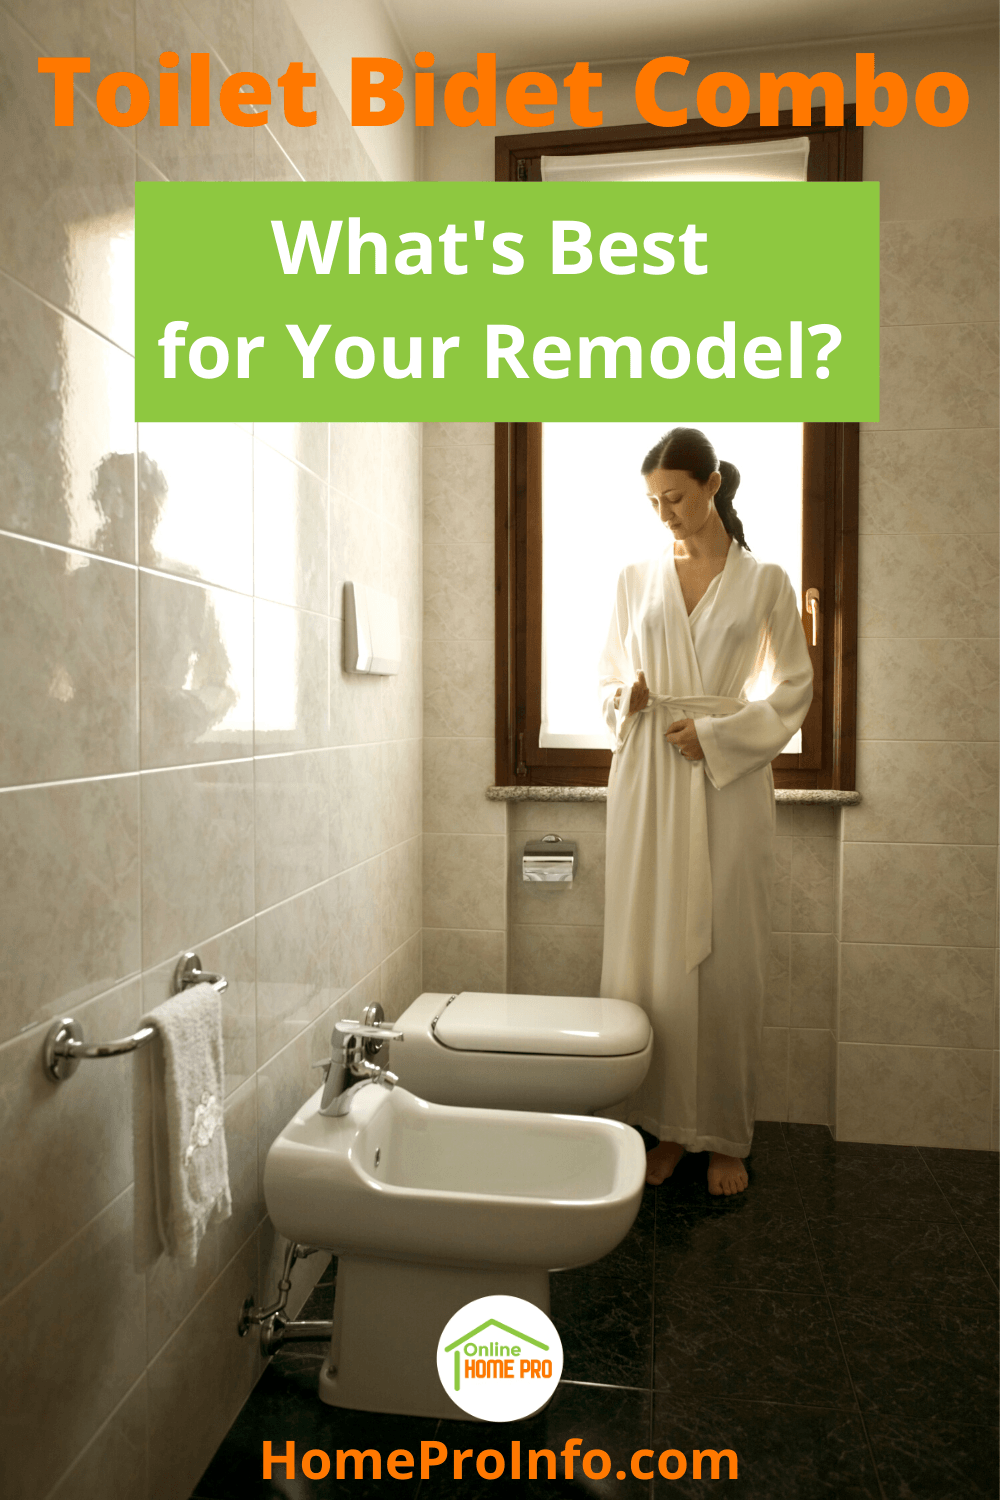 toilet bidet combo and remodeling